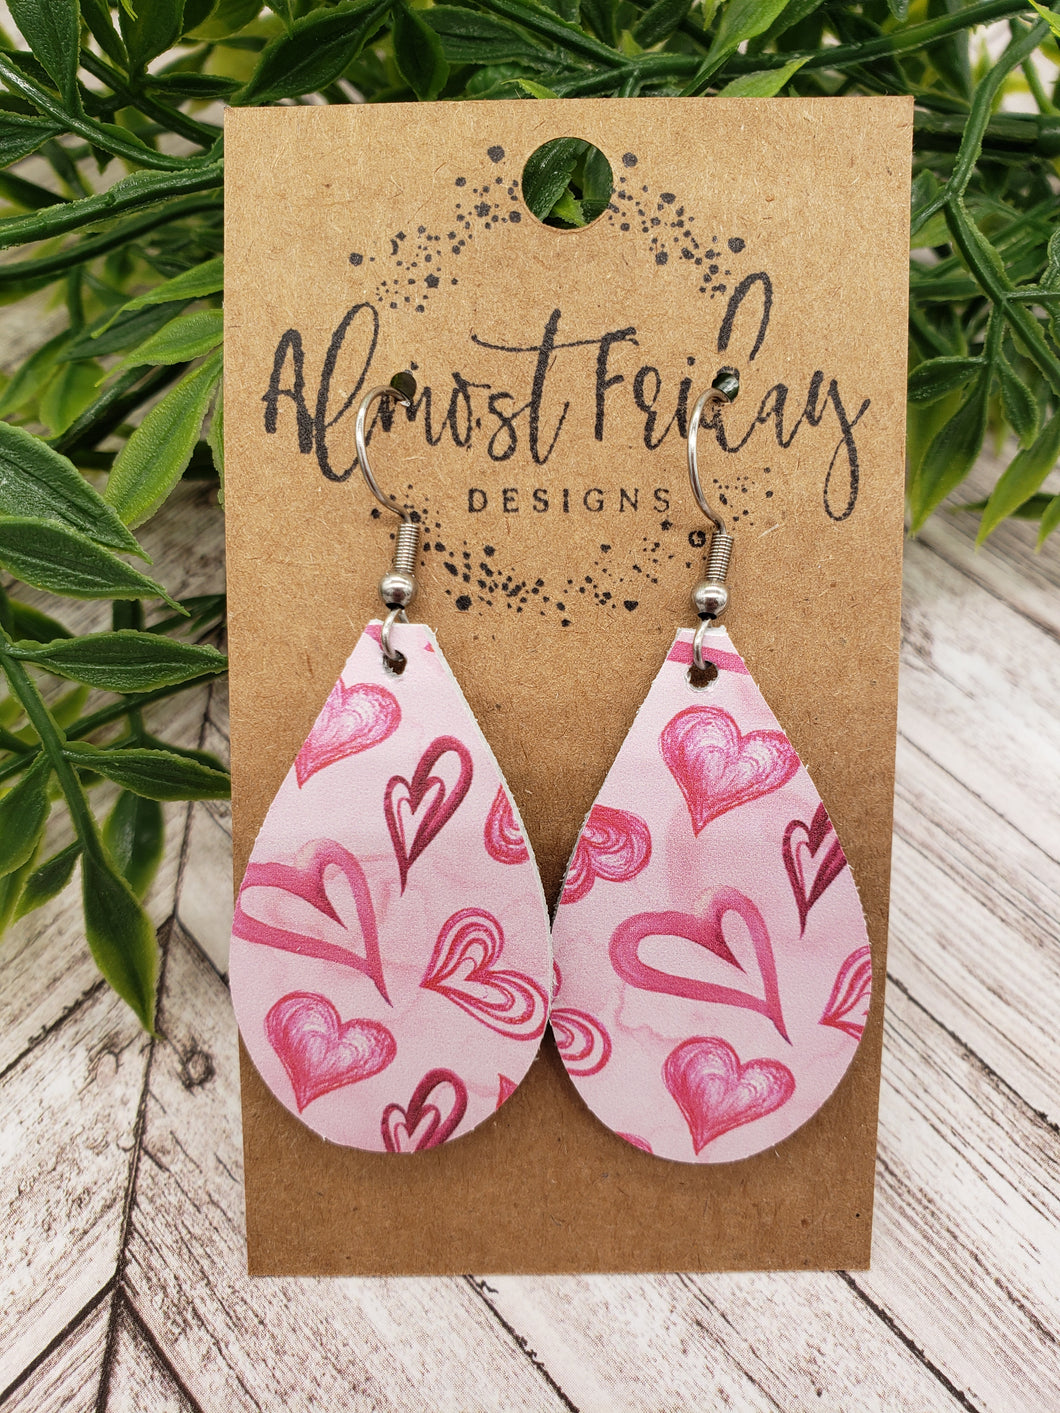 Genuine Leather Earrings - Valentine's Day - Teardrop Earrings - Heart - Pink and Red Hearts